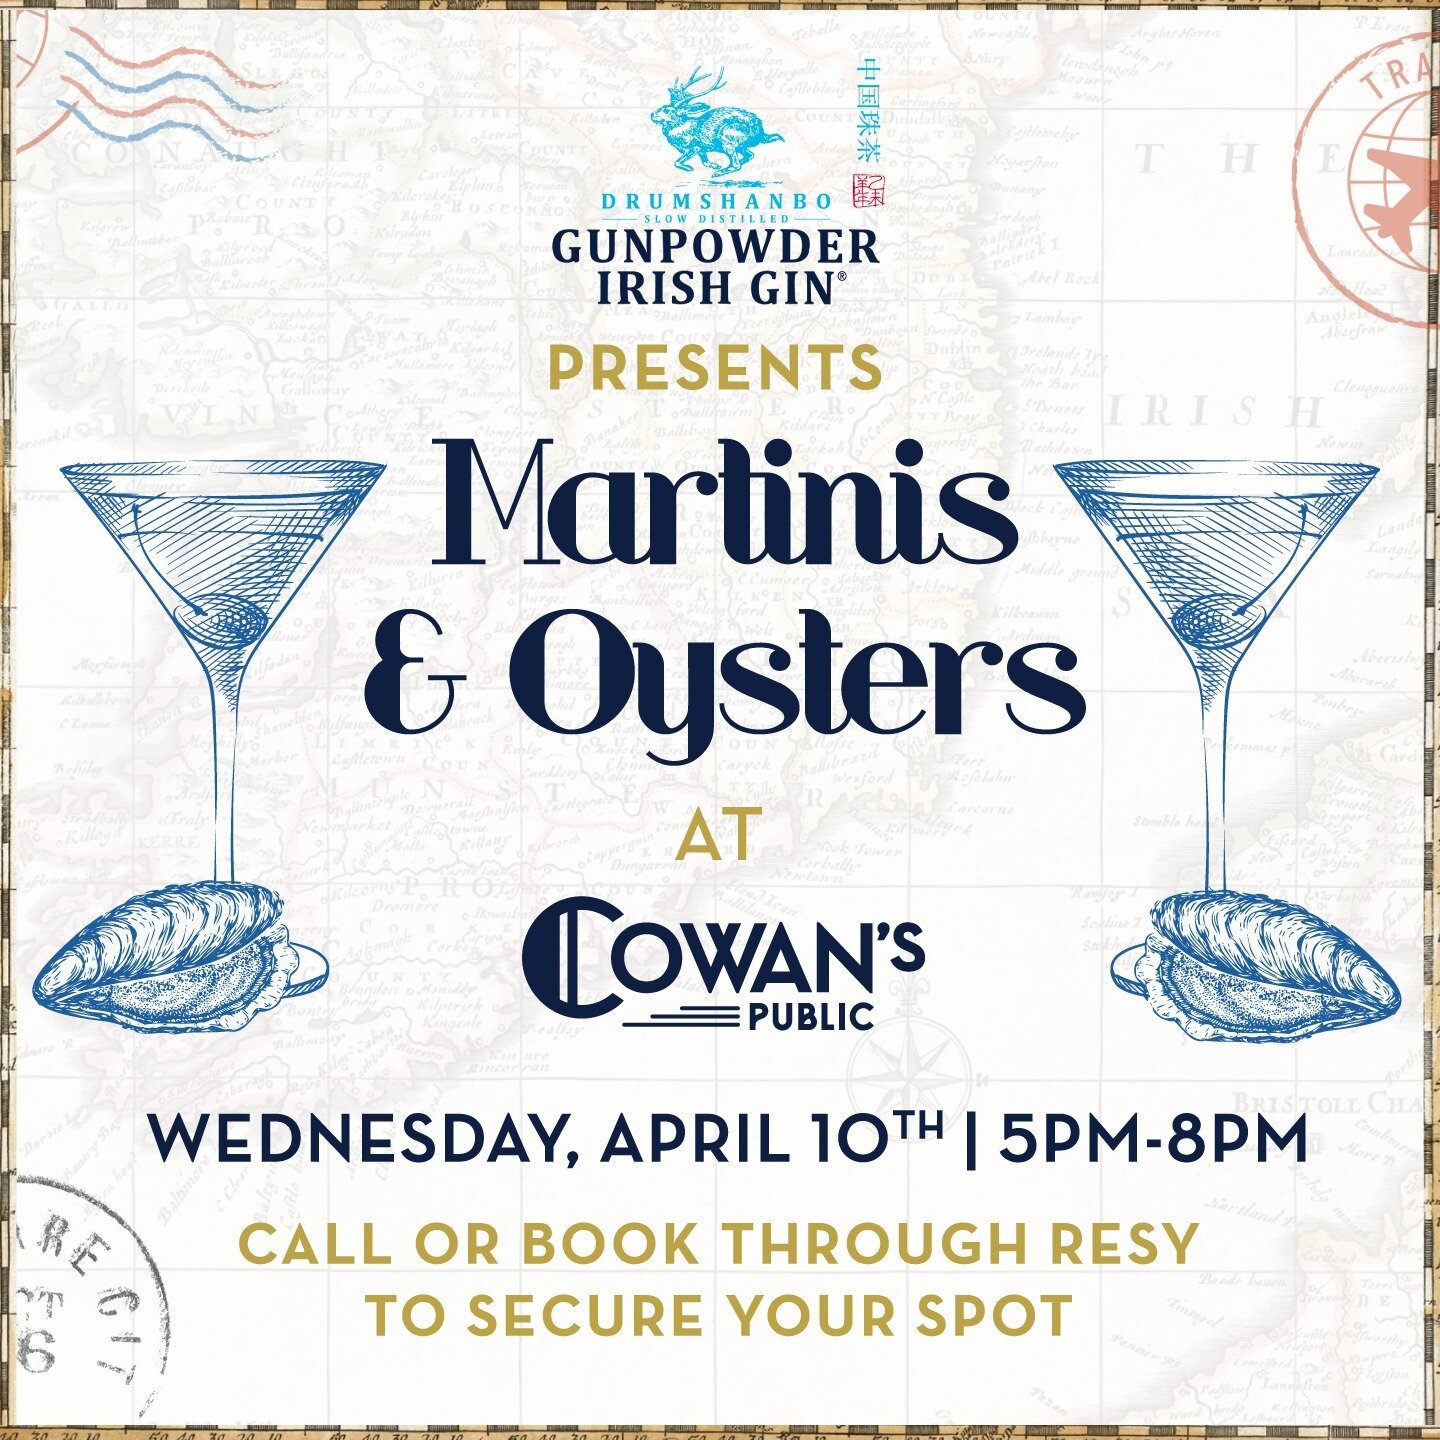 🔊 Calling all oyster lovers, get ready to embark on a flavor journey! 🐚  Join us on Wednesday, April 10th from 5-8pm for unforgettable evening of tasty oysters and handcrafted Gunpowder Gin martinis! Head to the link in our bio or Resy.com to reser